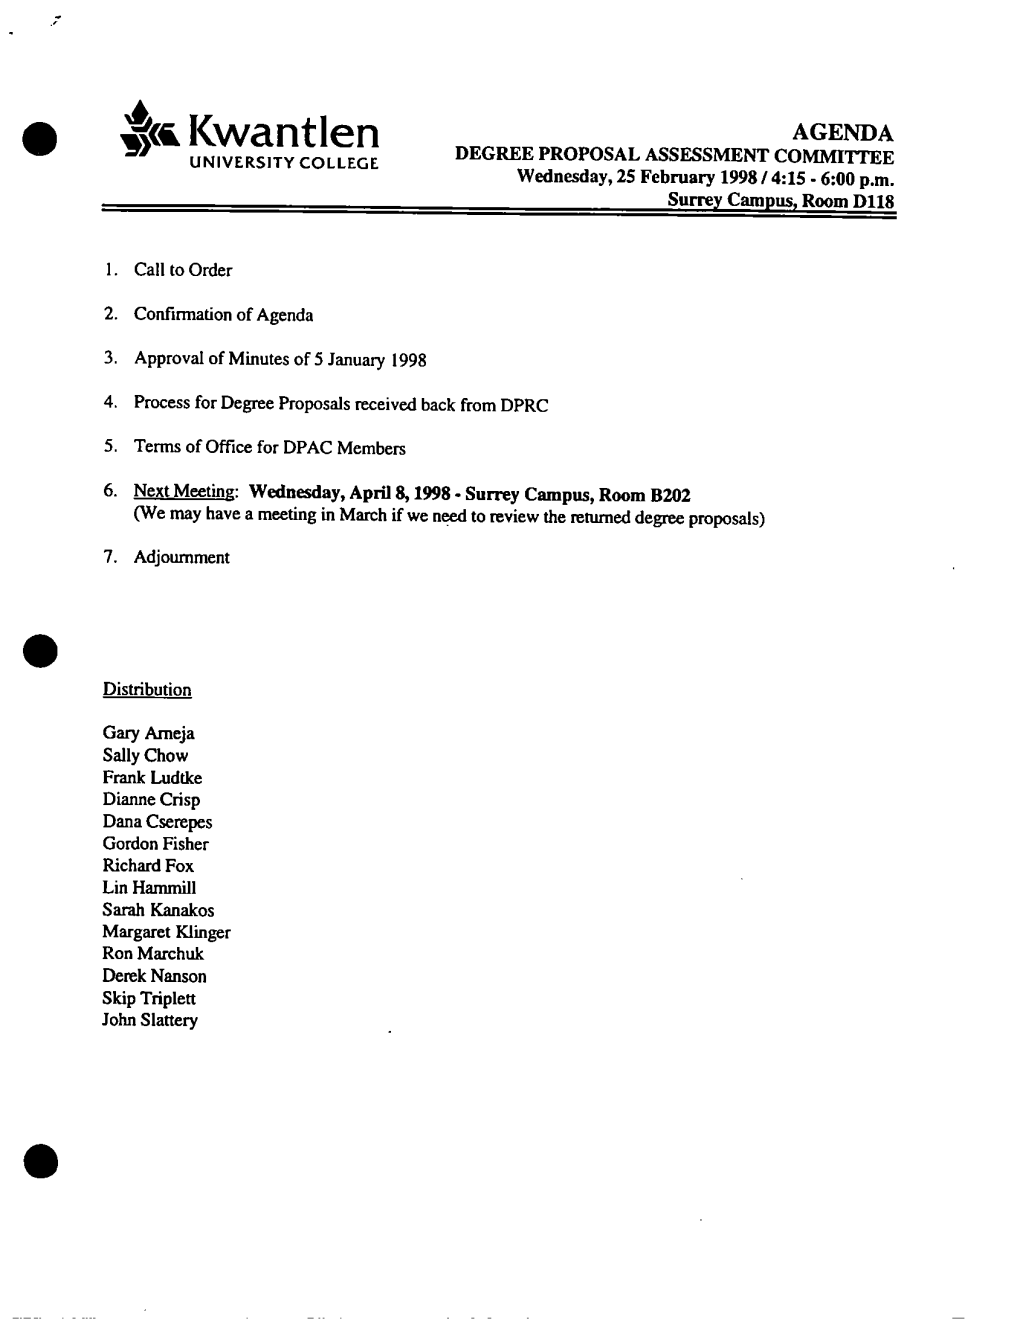 Kwantlen DEGREE PROPOSAL ASSESSMENT COMMITTEE UNIVERSITY COLLEGE Wednesday 25 February 1998 415 600 Pm Surrey Campus Room D118